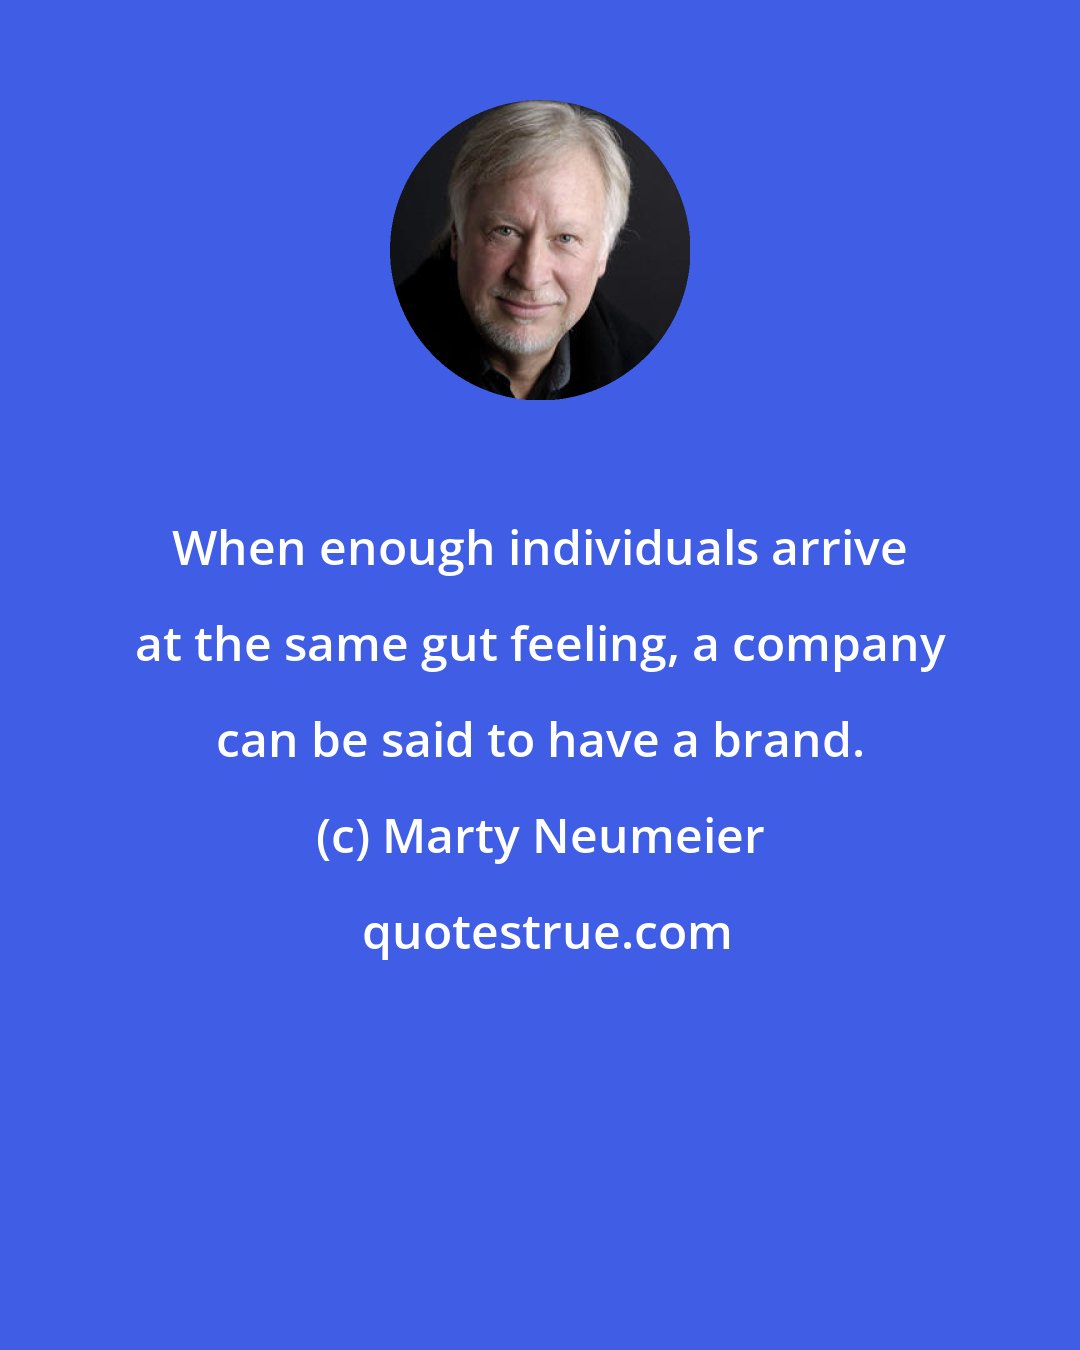 Marty Neumeier: When enough individuals arrive at the same gut feeling, a company can be said to have a brand.